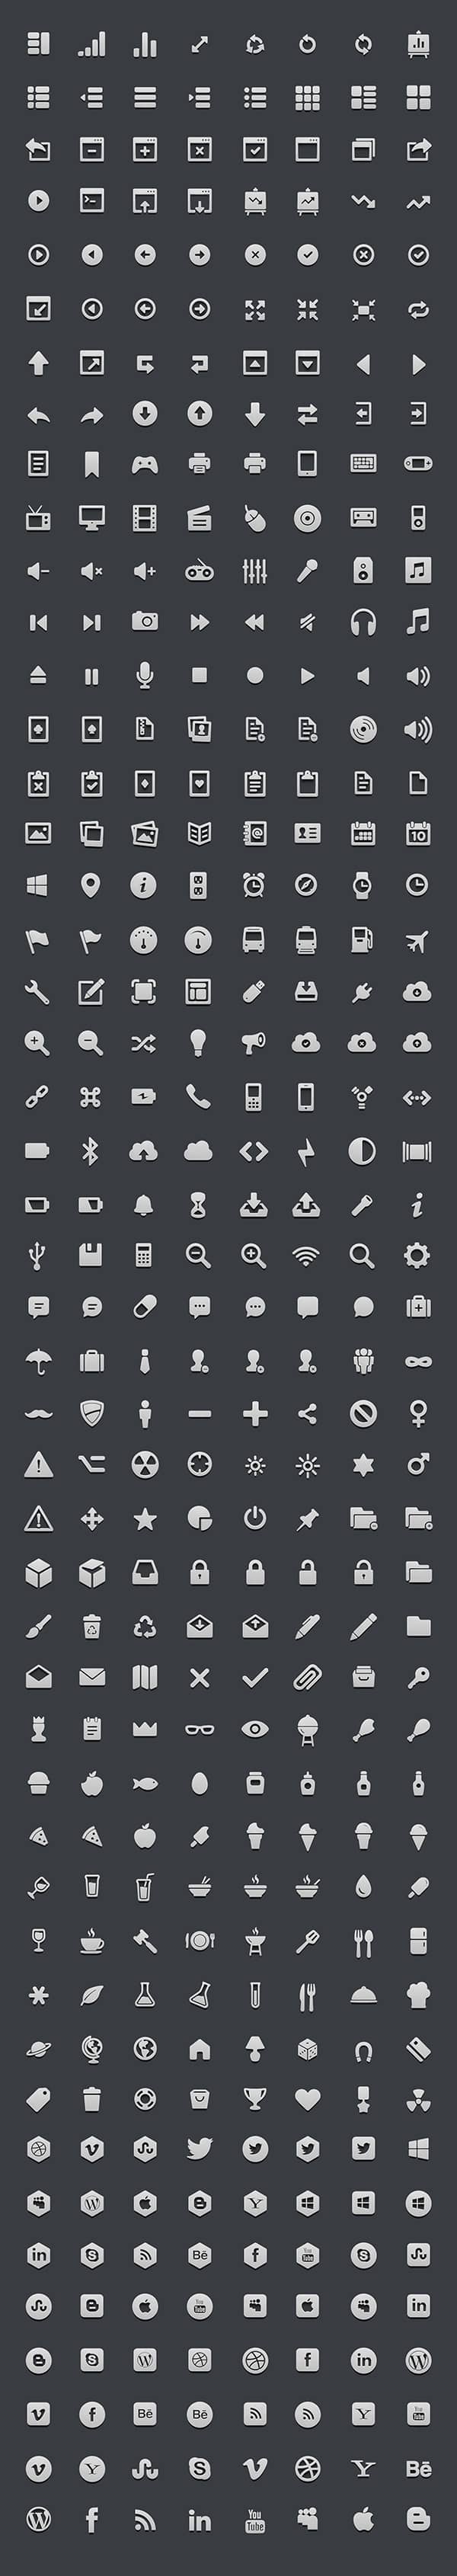 364 High-res 3D Icon Set | GraphicBurger